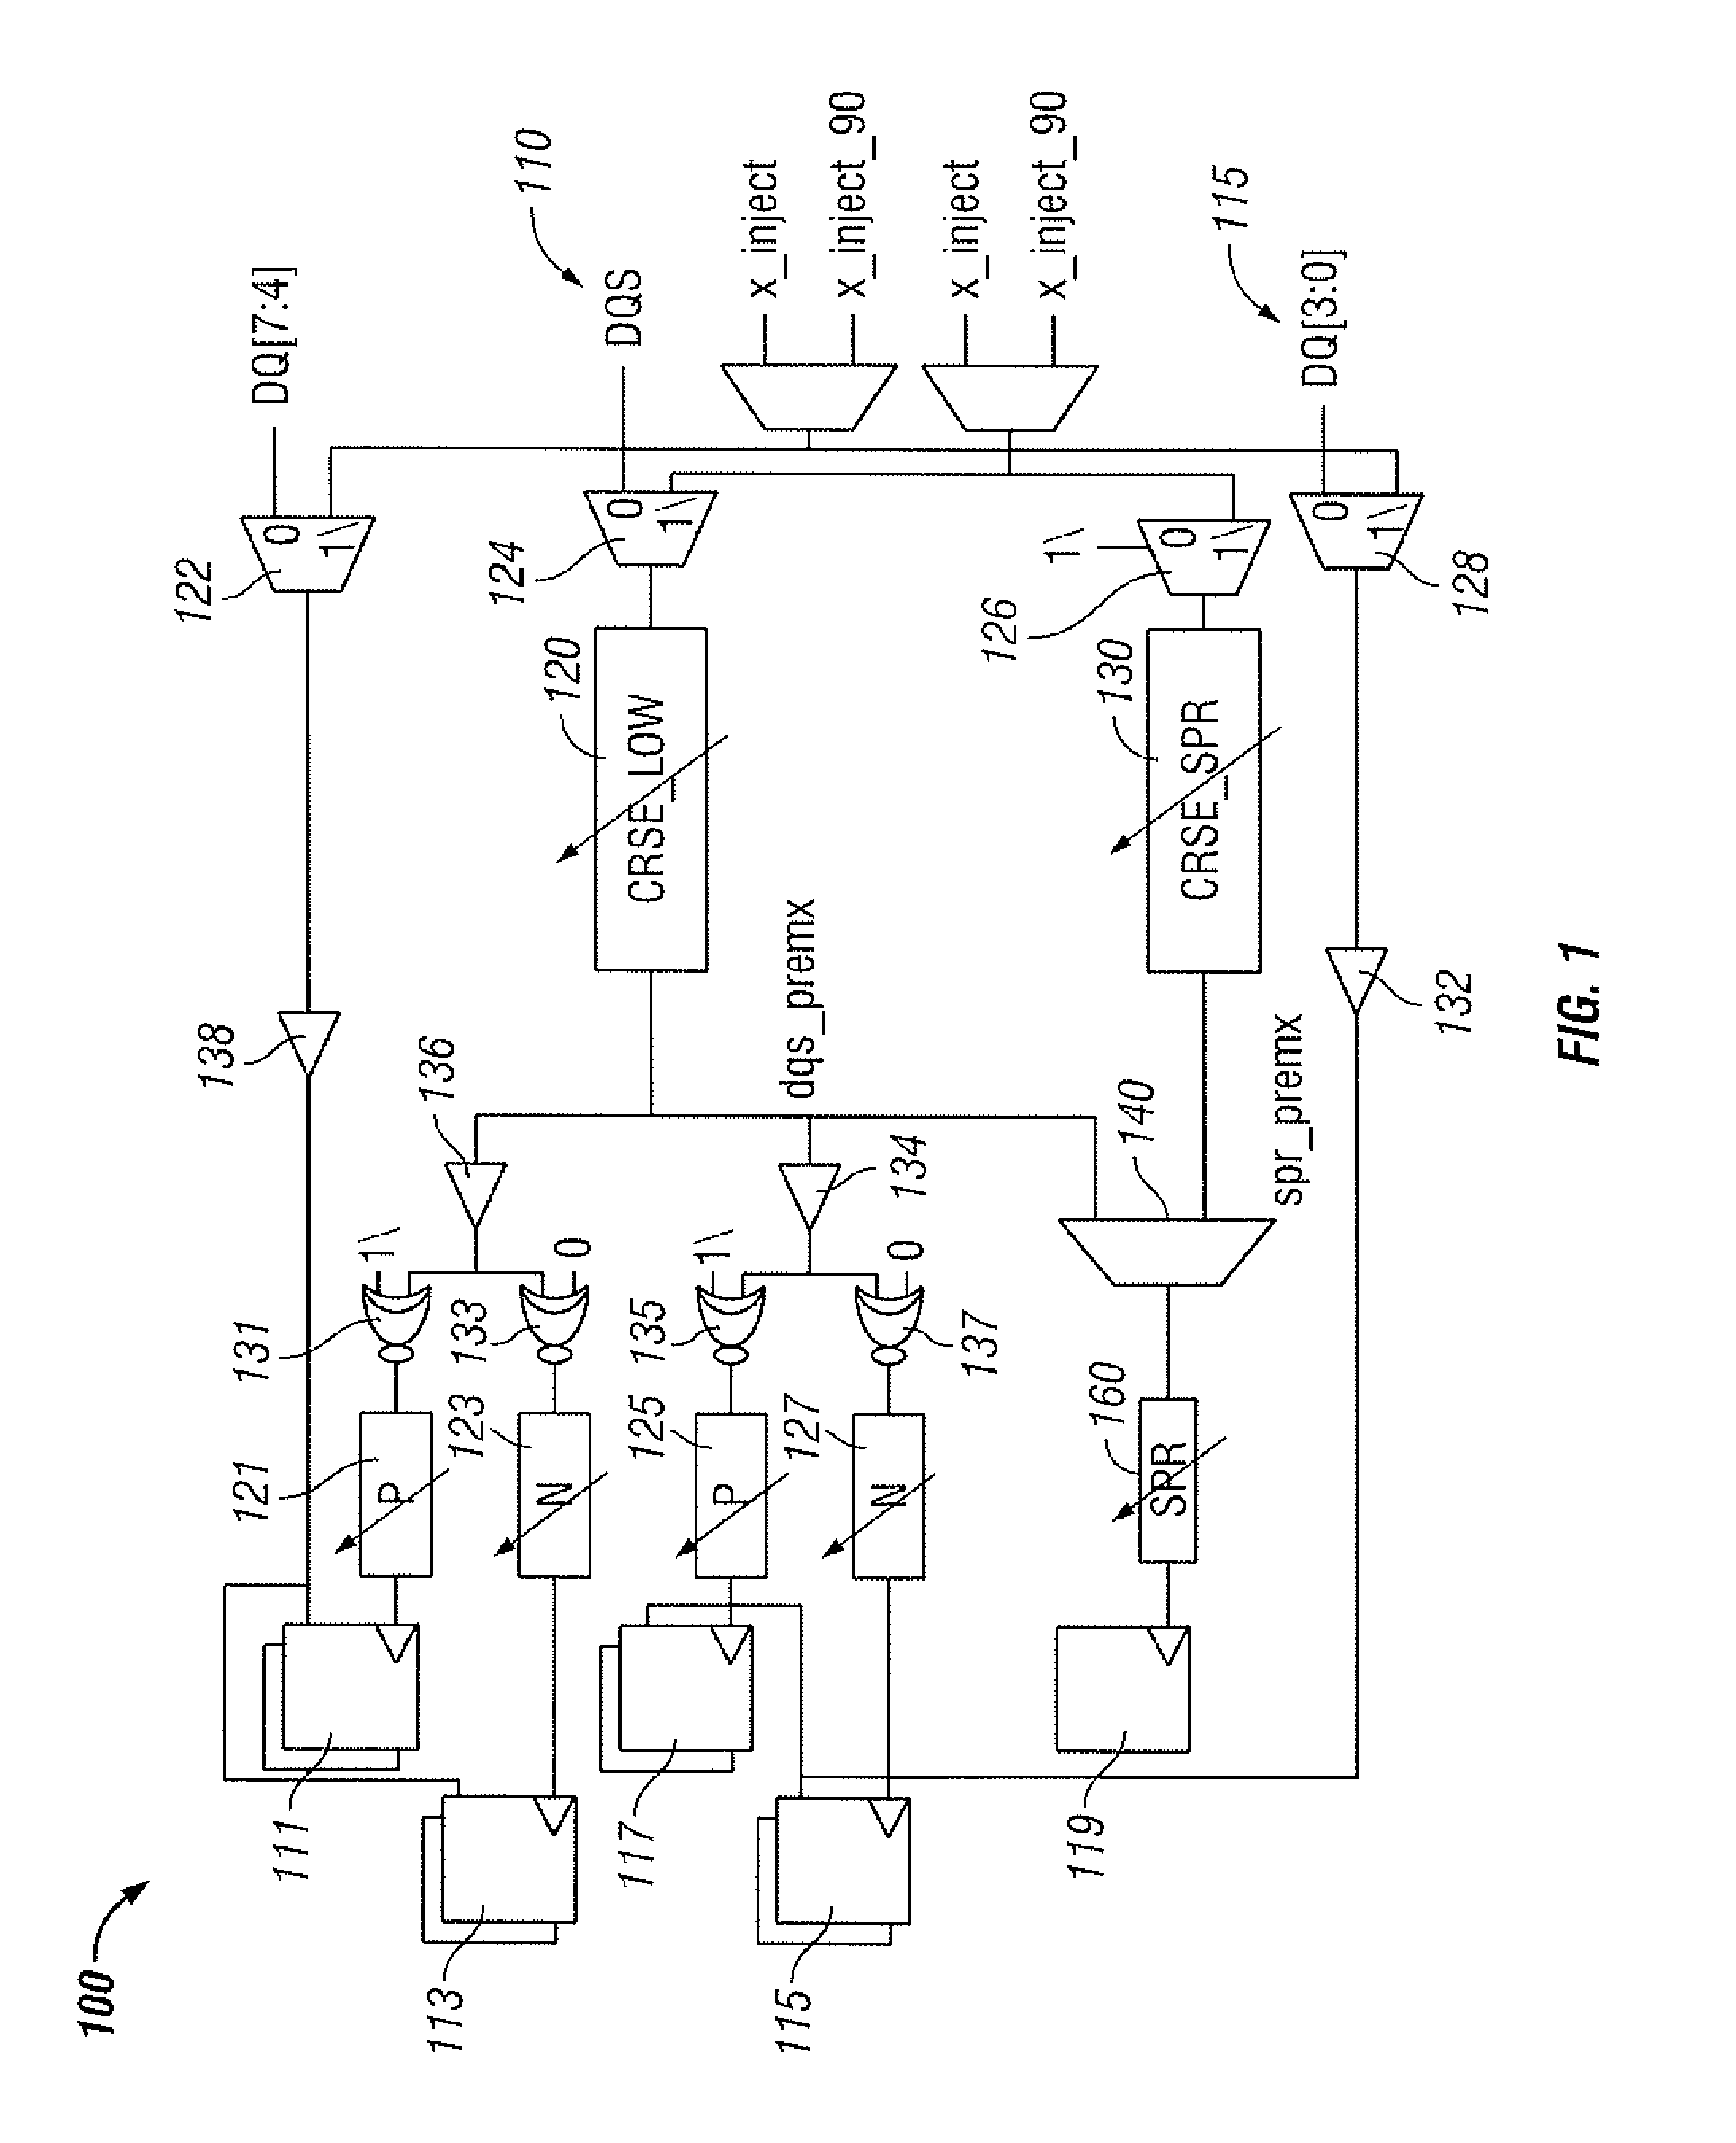 Non-linear common coarse delay system and method for delaying data strobe